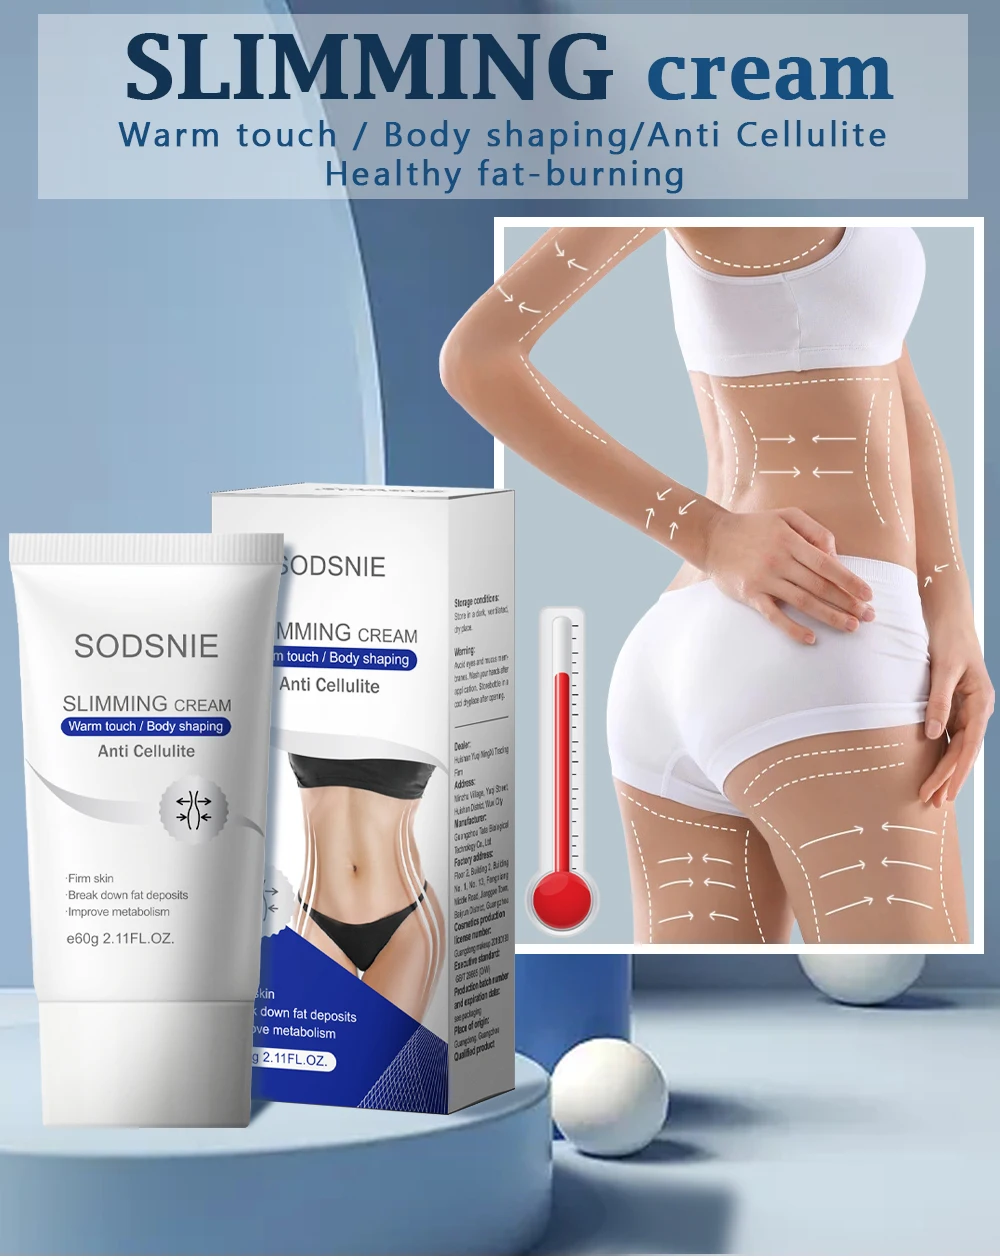 slimming cream for weight loss